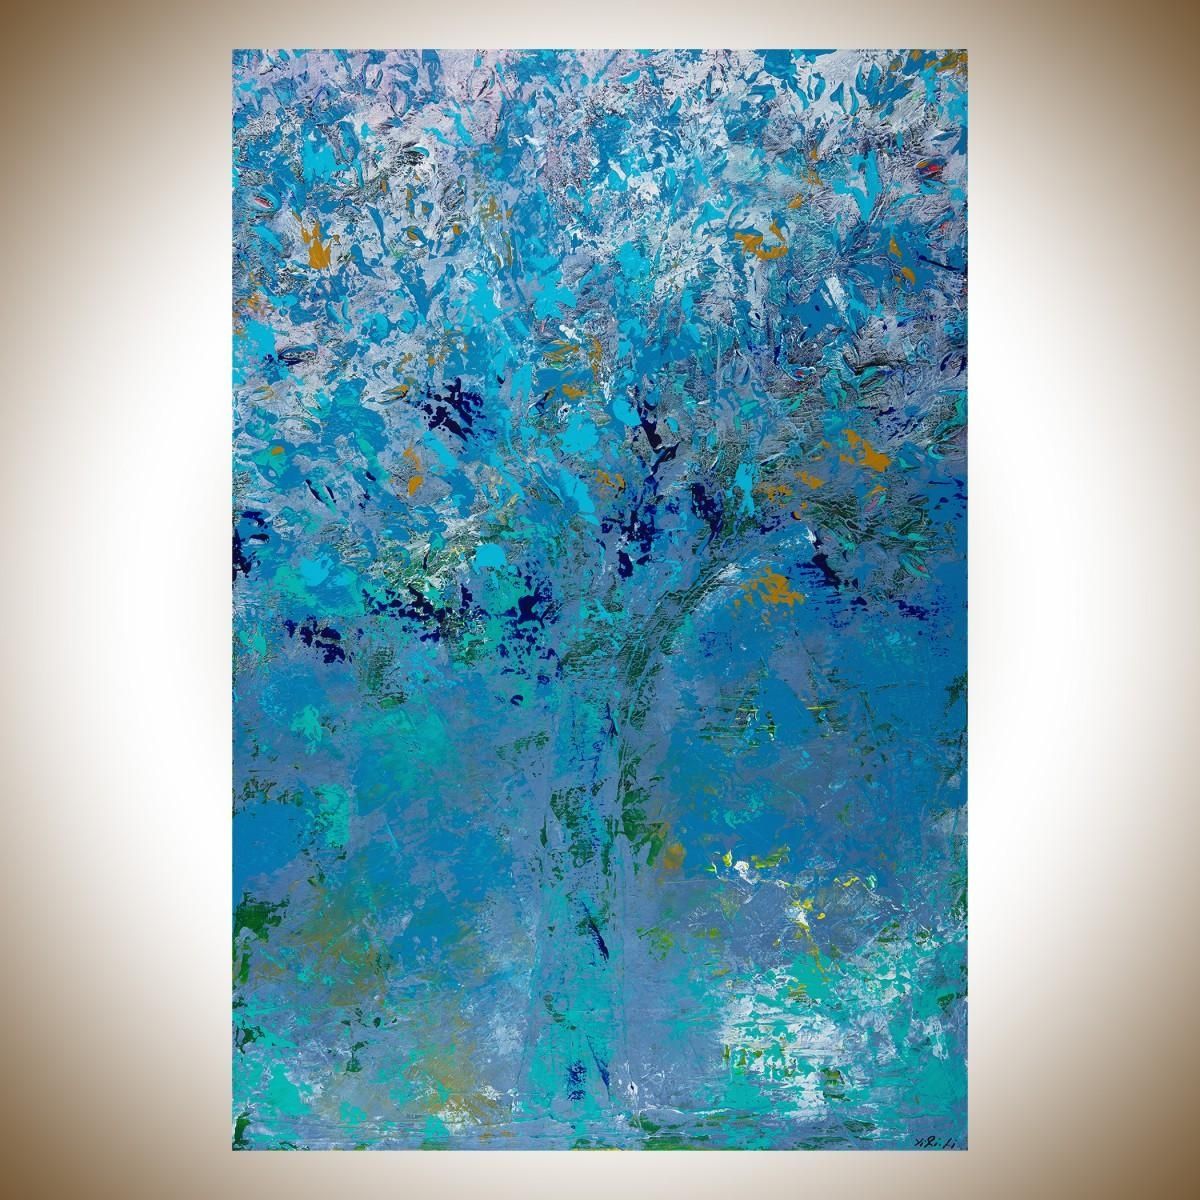 First Snowfallqiqigallery 36"x24" Original Modern Contemporary With Turquoise And Black Wall Art (View 4 of 20)